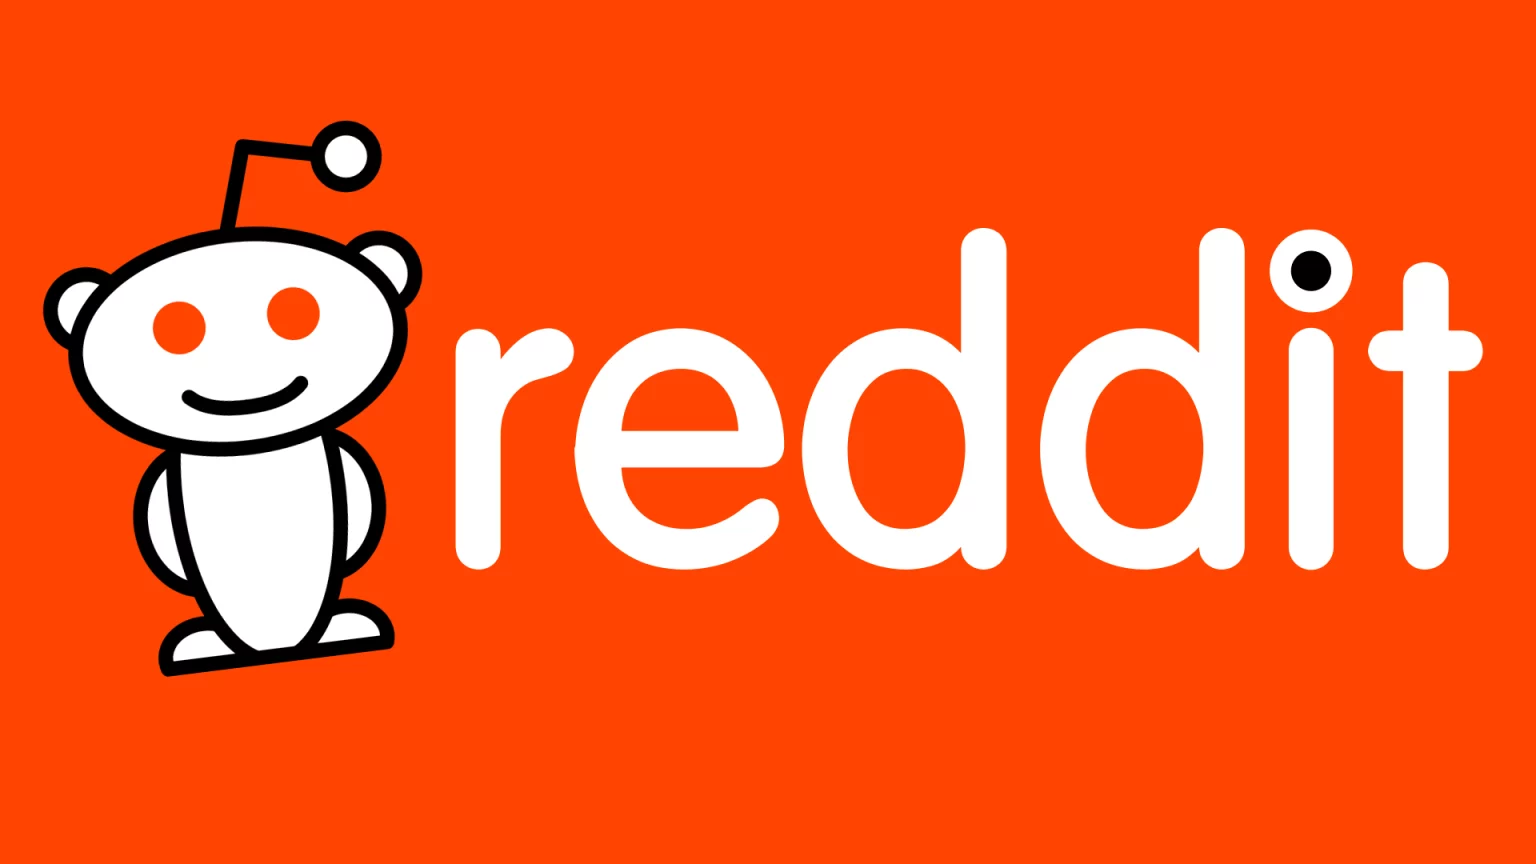 How Reddit, At ~$6B Arguably One Of The Most Undervalued Companies In World, Can Unlock The Next Step-Change In Valuation And Protect Against Niche Competitors (Mario Gabriele/The Generalist)